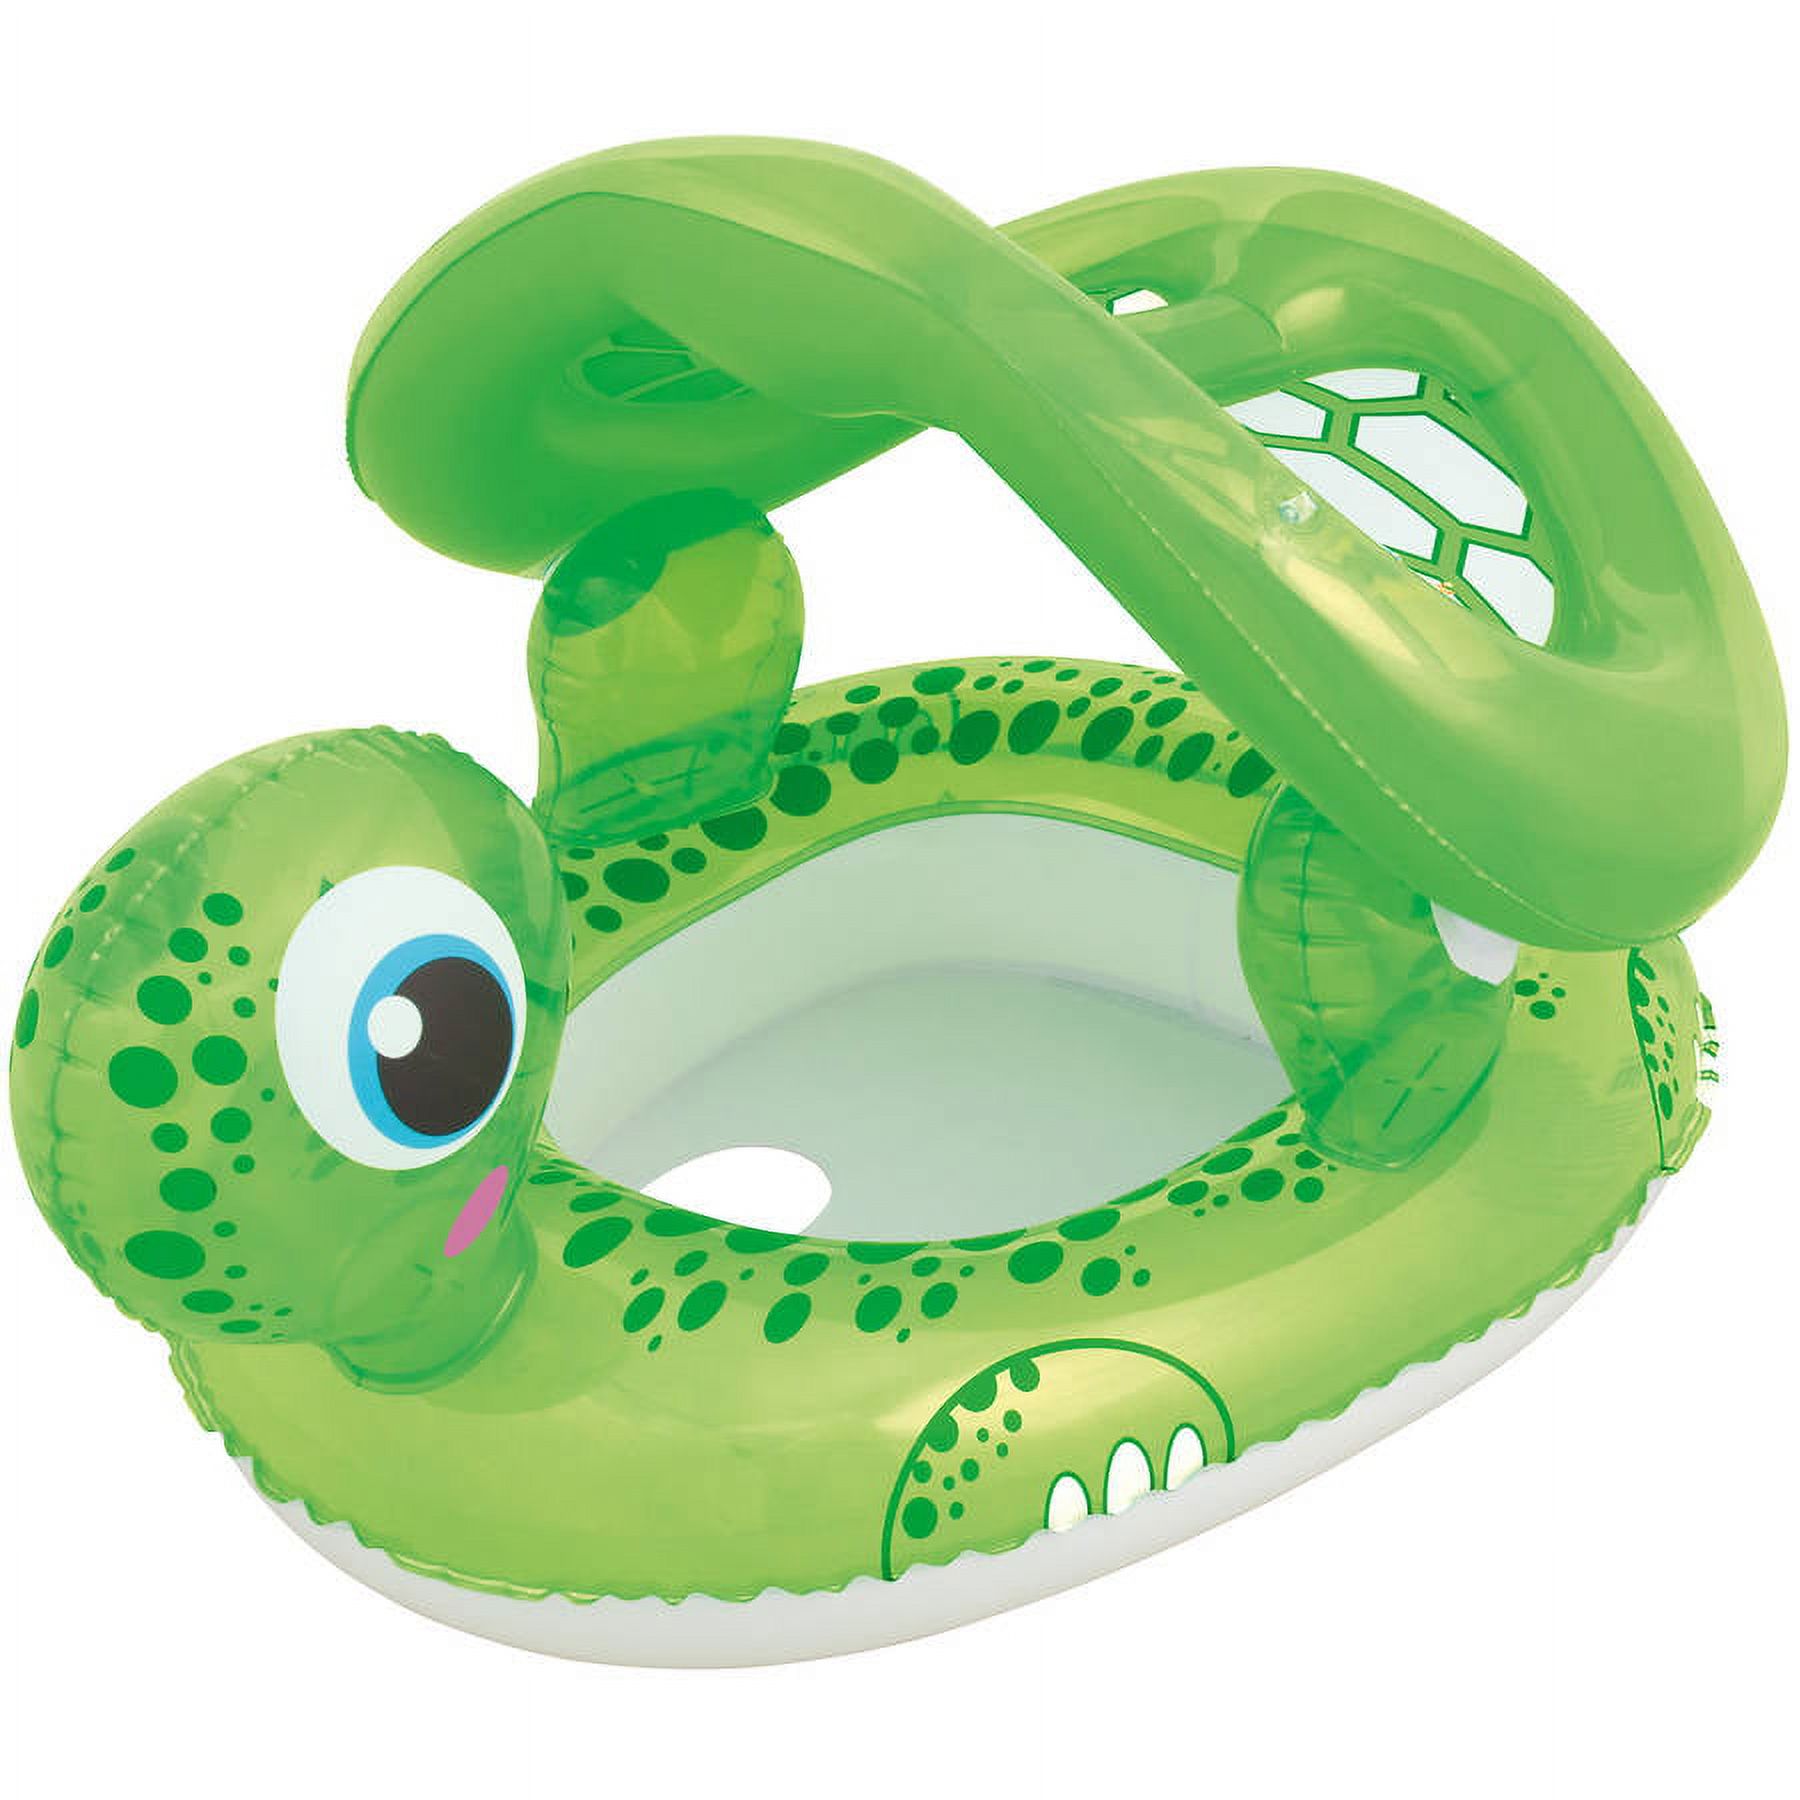 H2OGO! Floating Turtle Baby Care Seat Pool Float - image 2 of 2